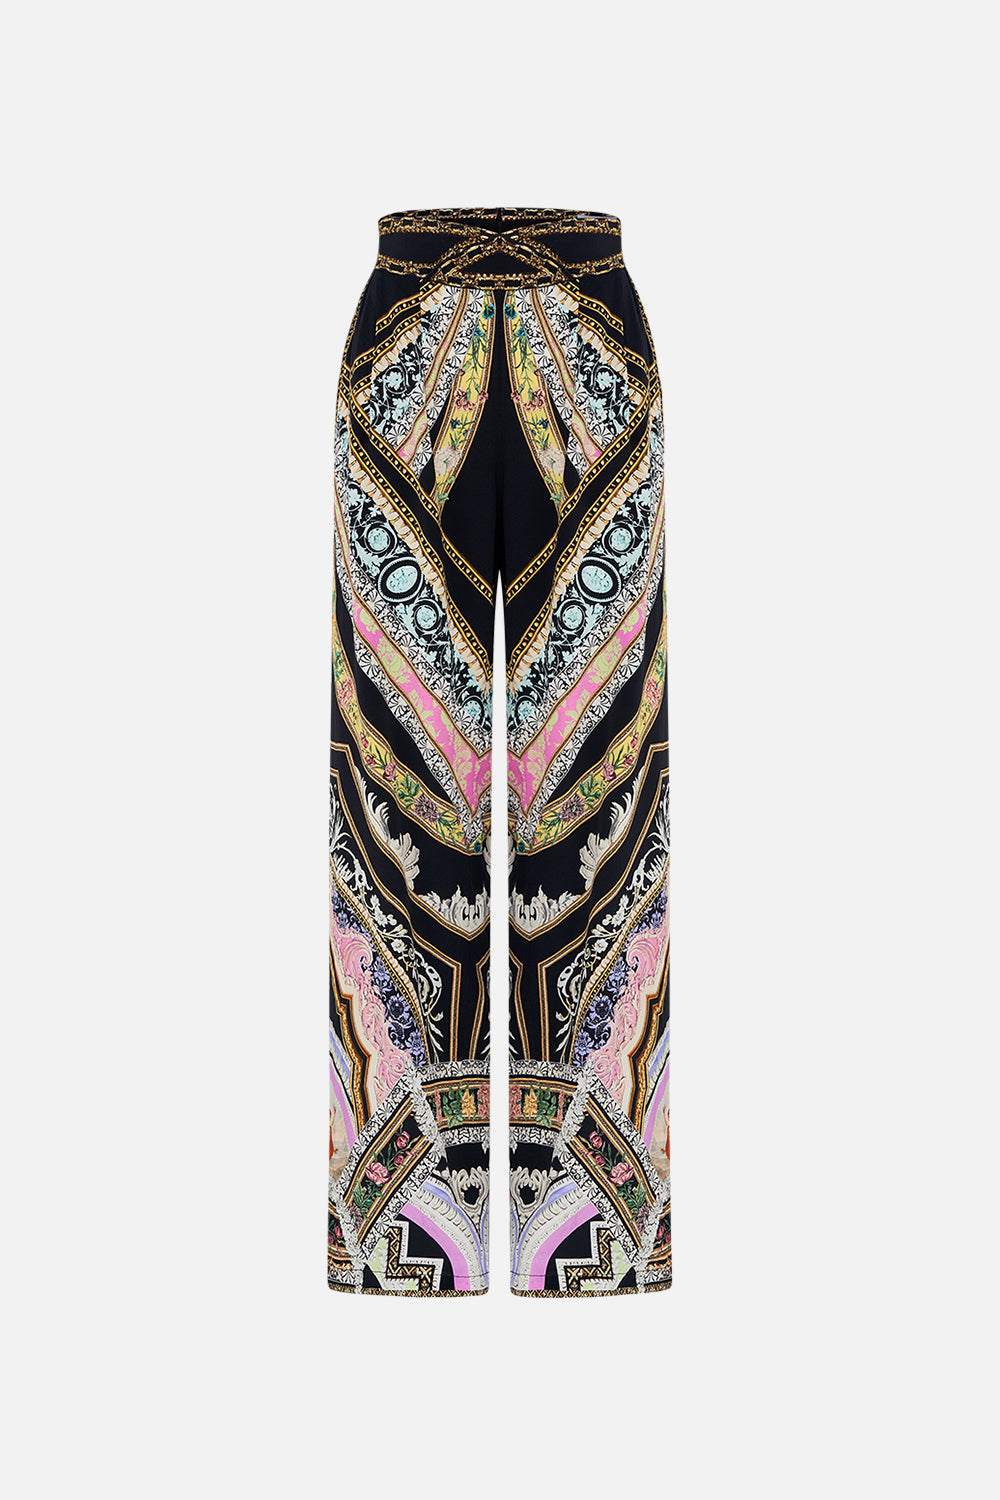 CAMILLA flared pant in Florence Field Day print 